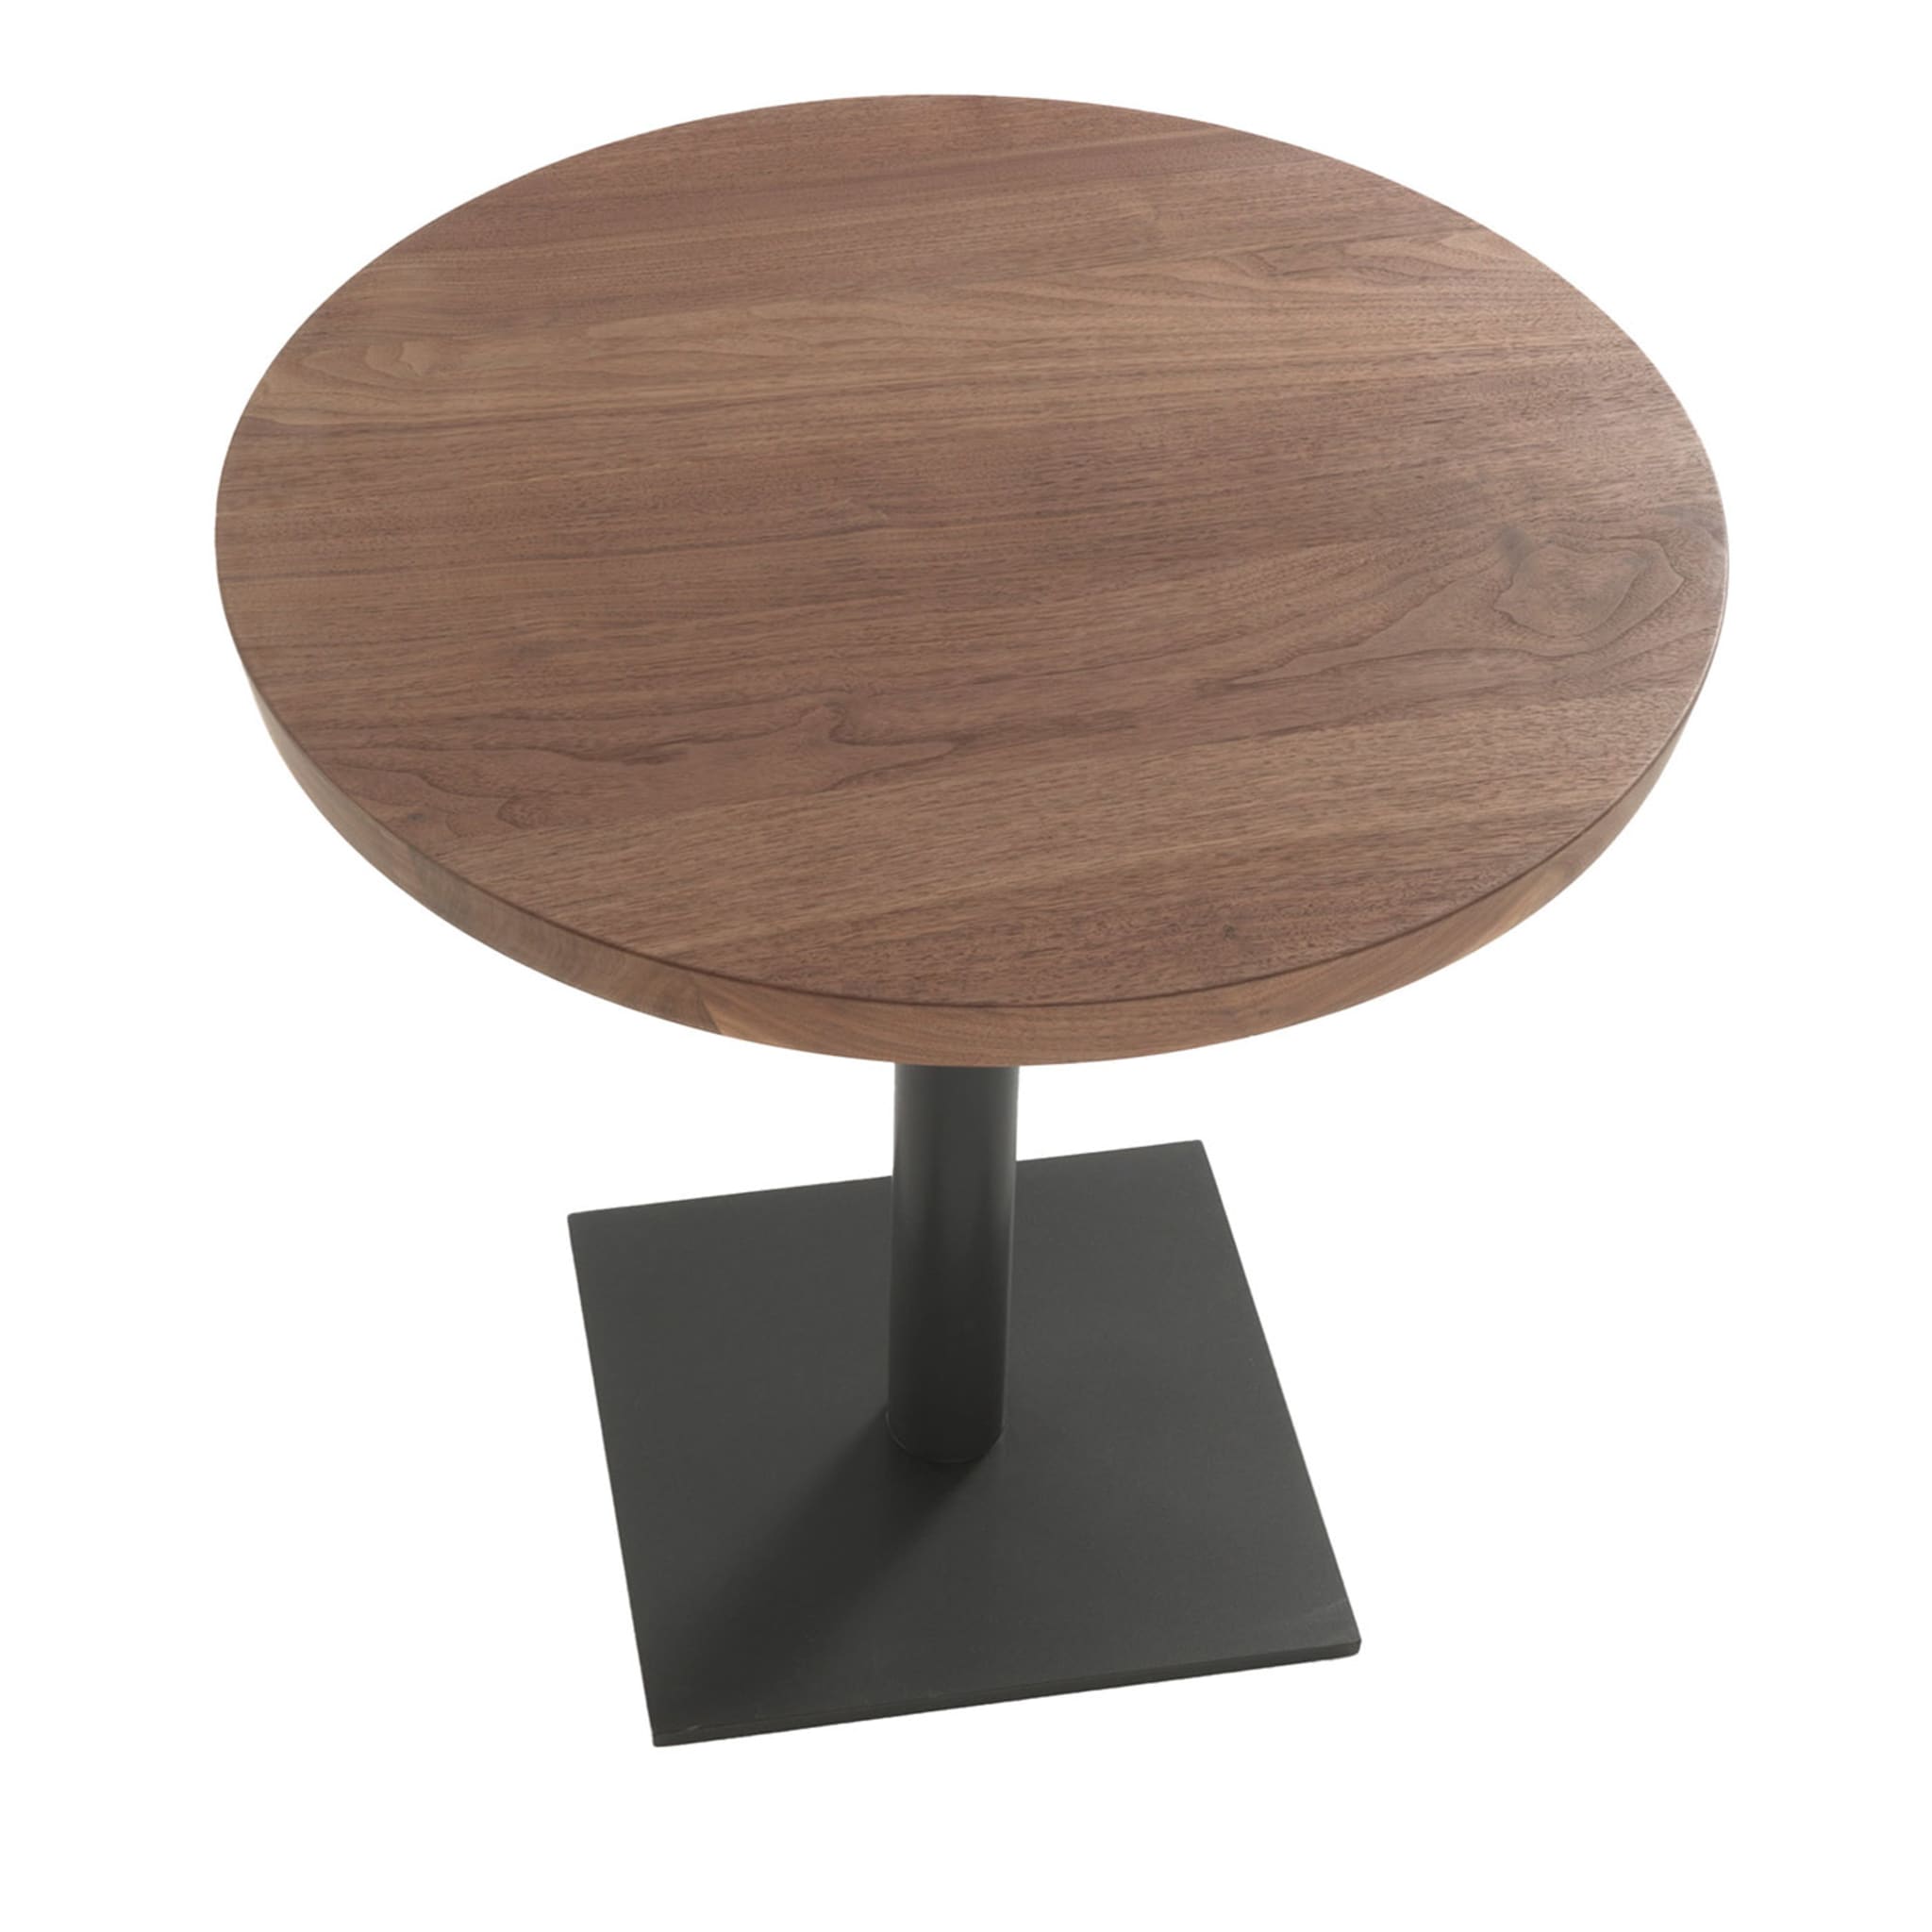 Pebbles Small Round Coffee Table by Terry Dwan - Alternative view 1